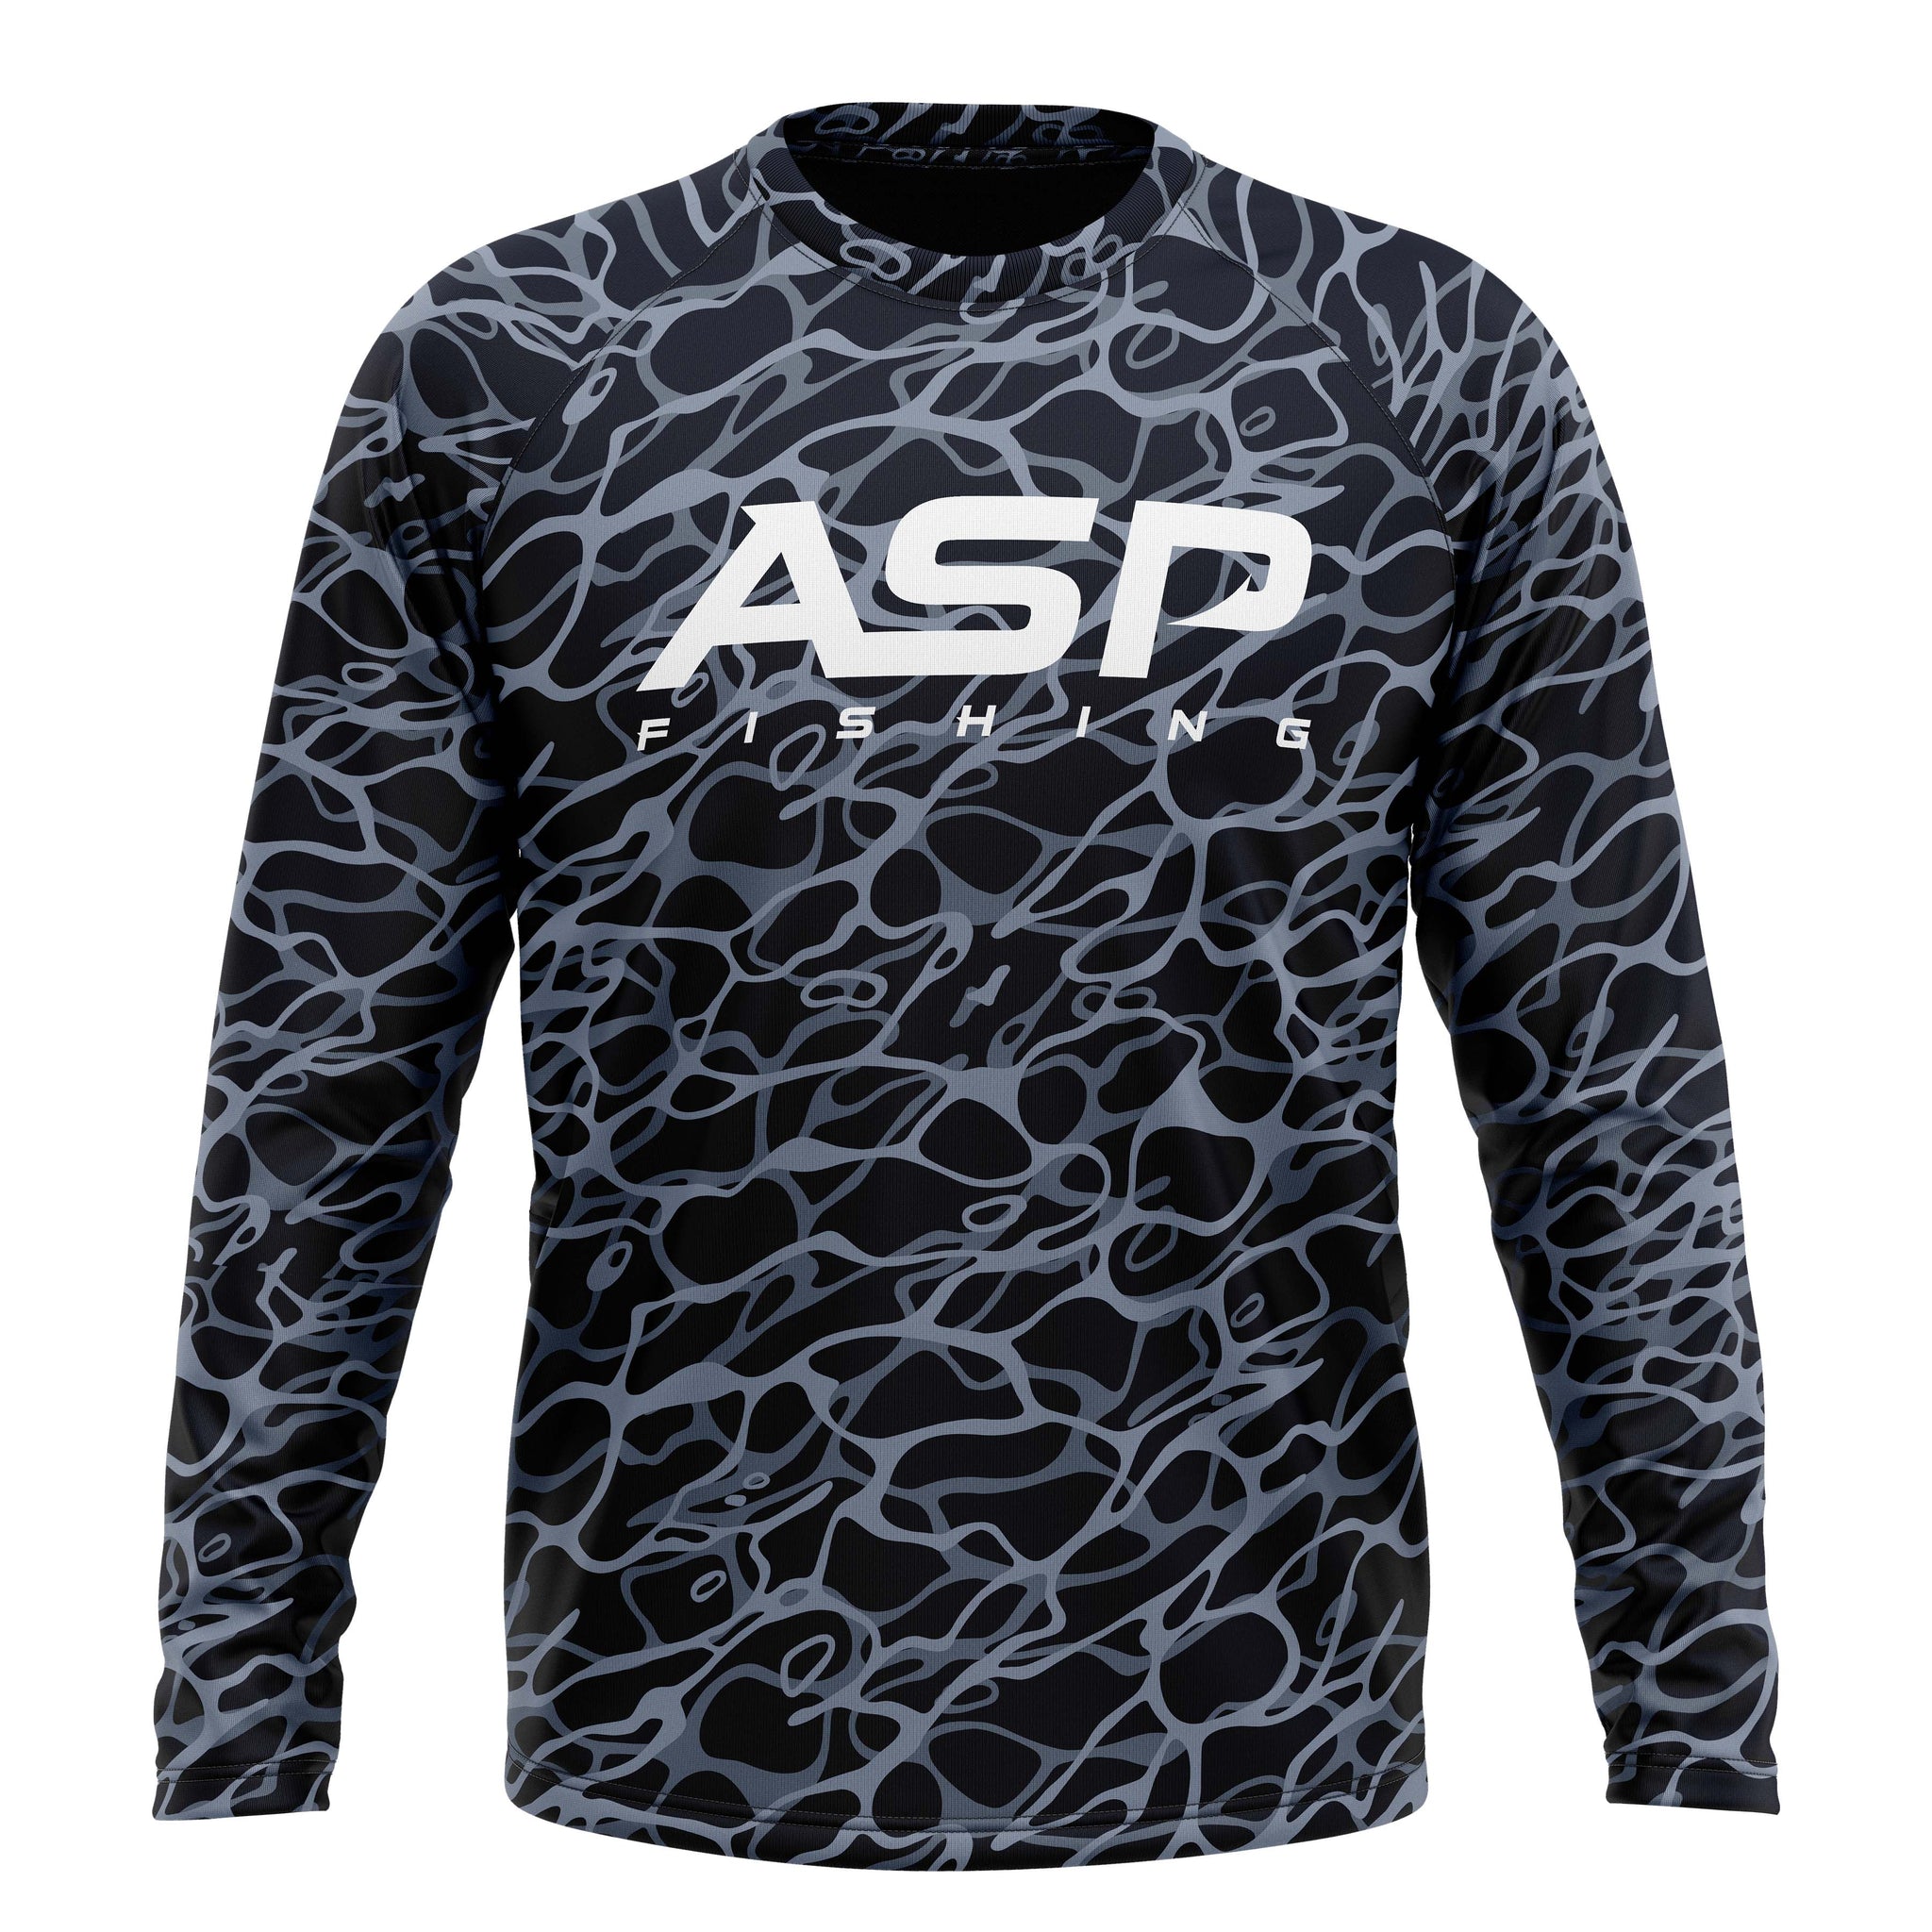 ASP Current Series Long Sleeve